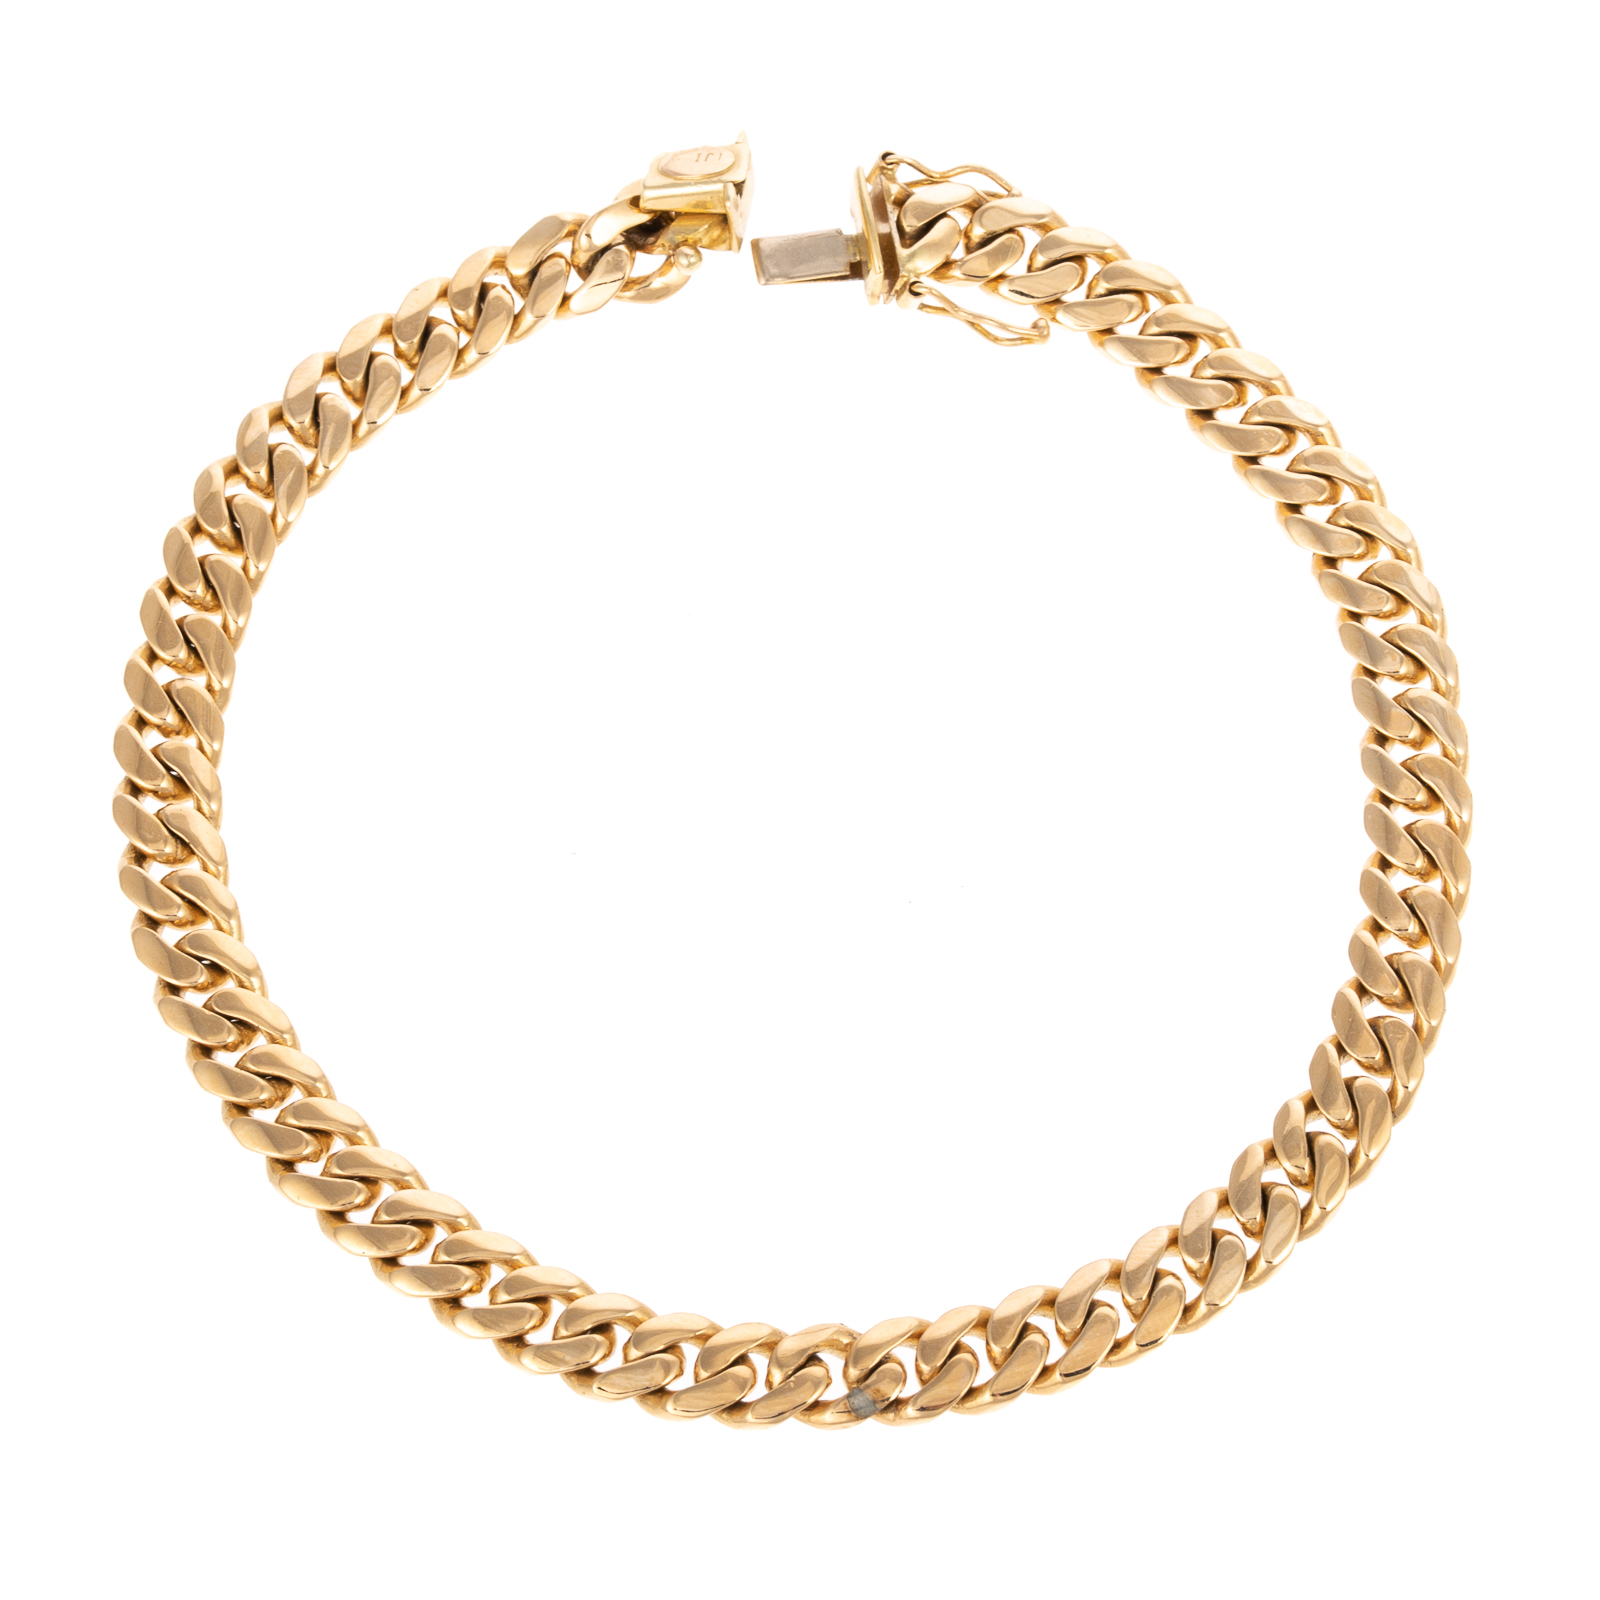 A 14K YELLOW GOLD CURB LINK ANKLET 287955